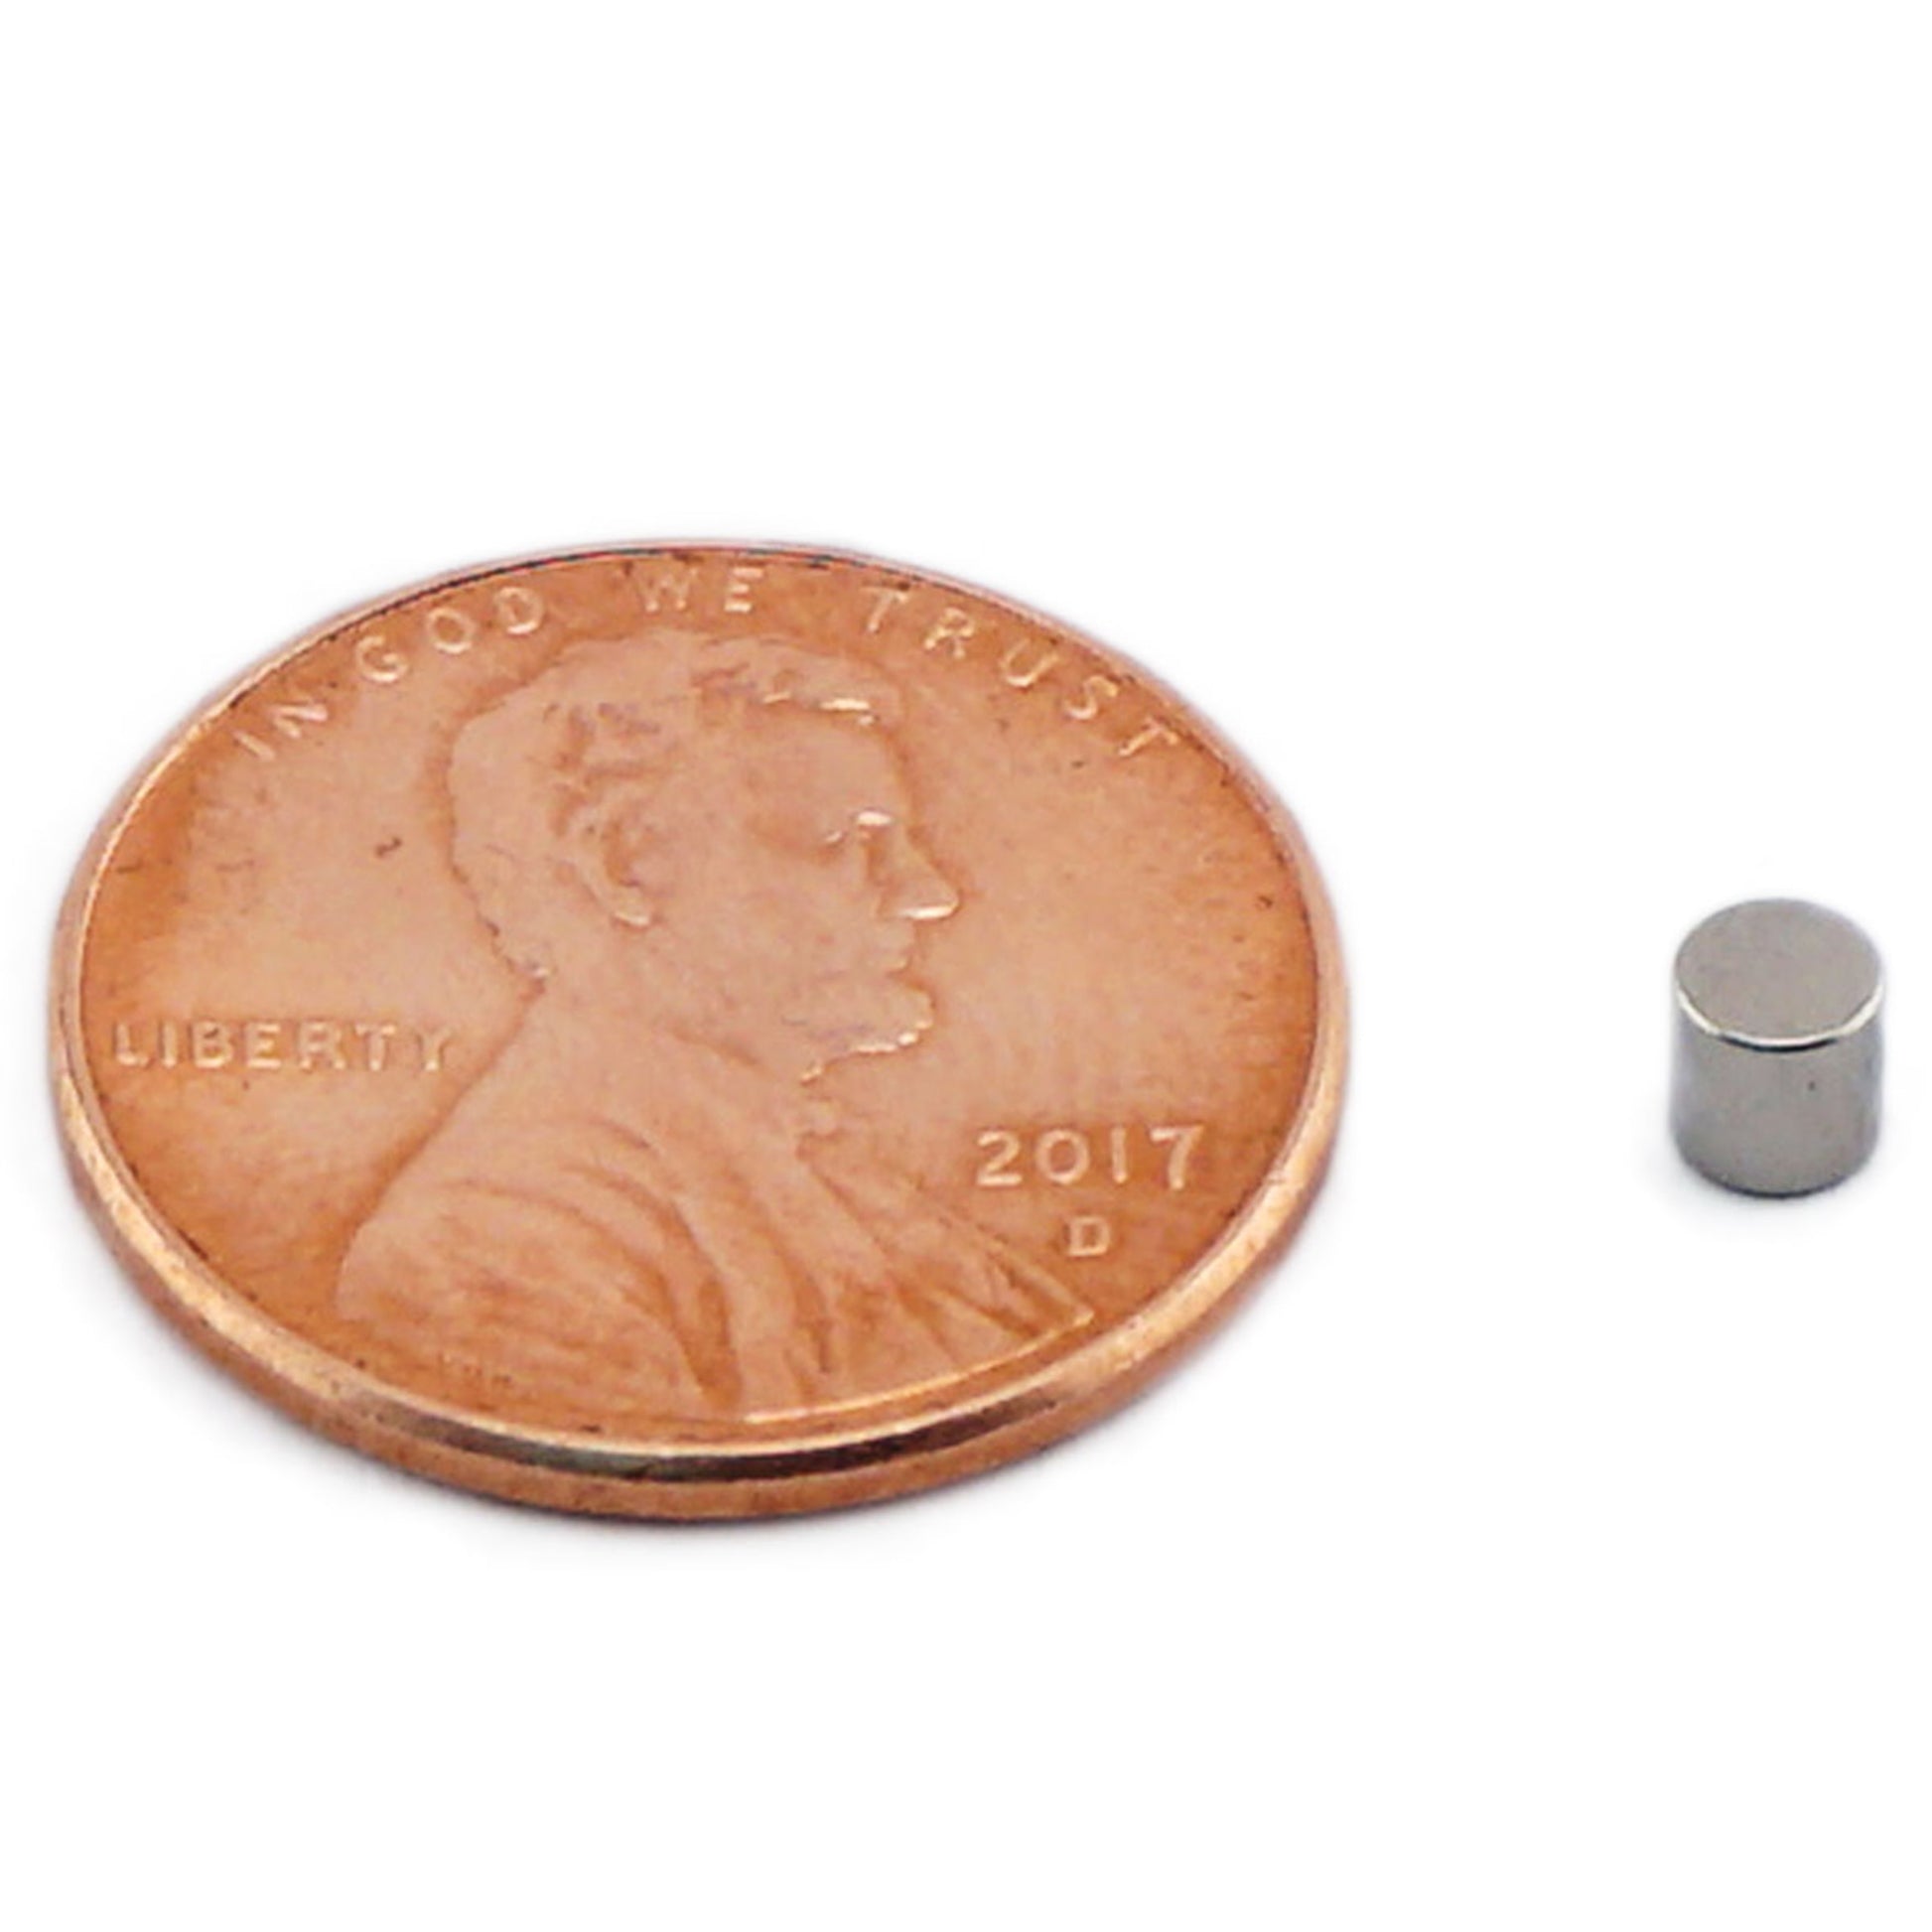 Load image into Gallery viewer, ND001209N Neodymium Disc Magnet - Compared to Penny for Size Reference